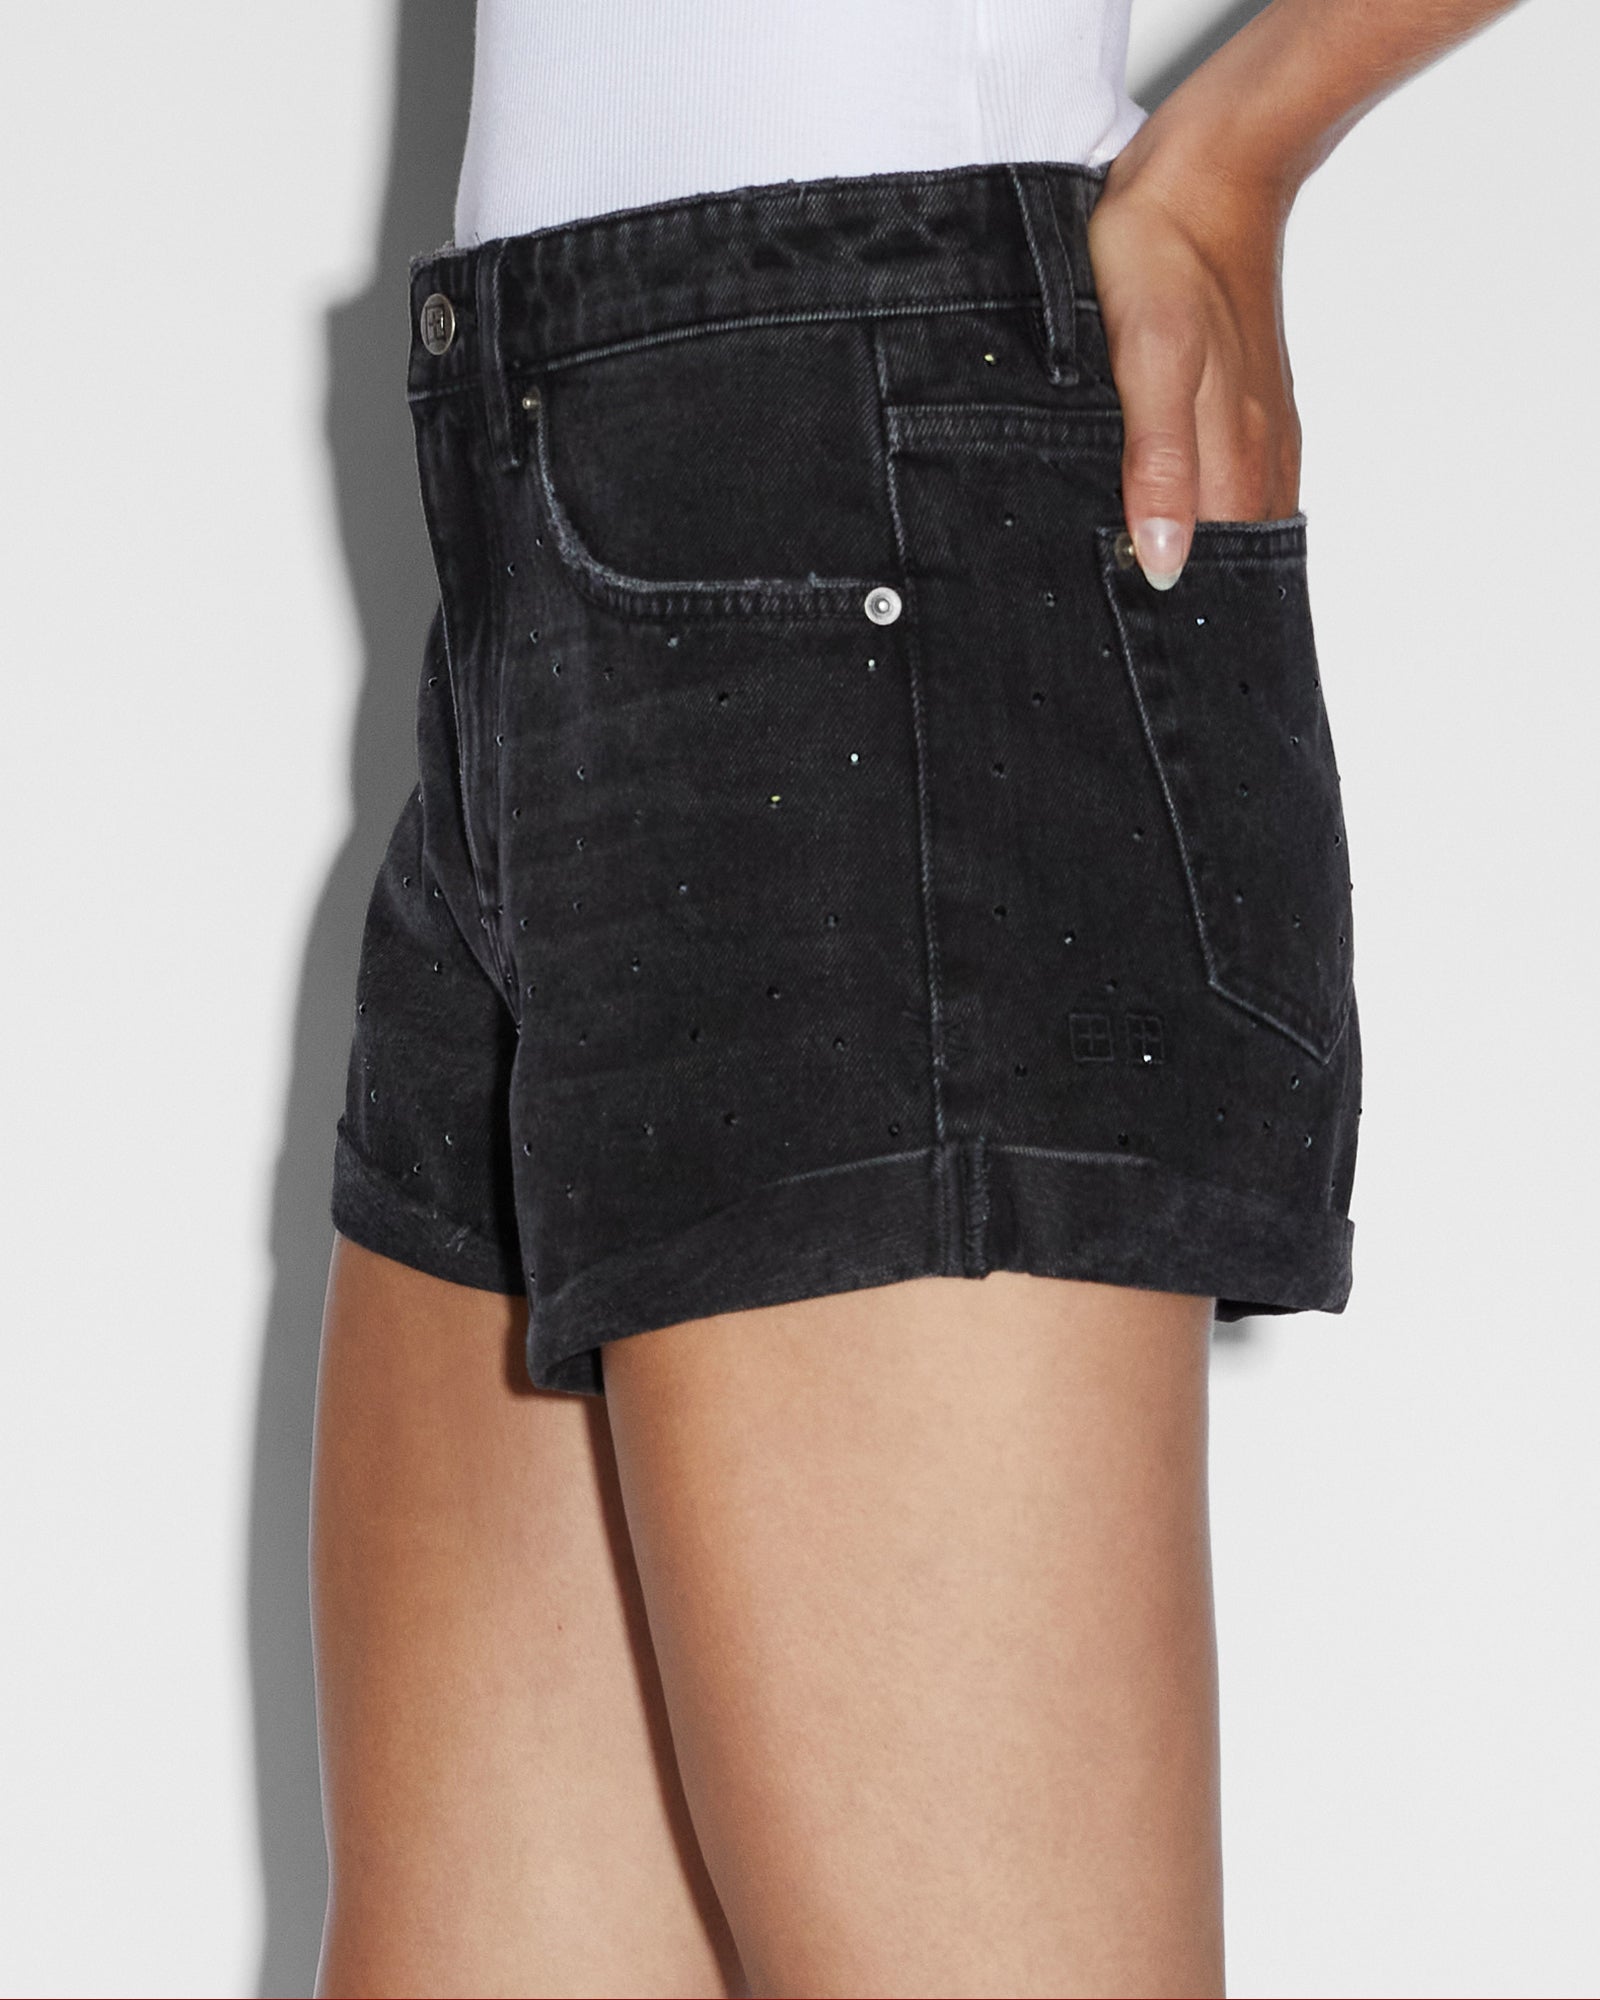 Black, Shorts For Women, High-Waisted & Jean Shorts